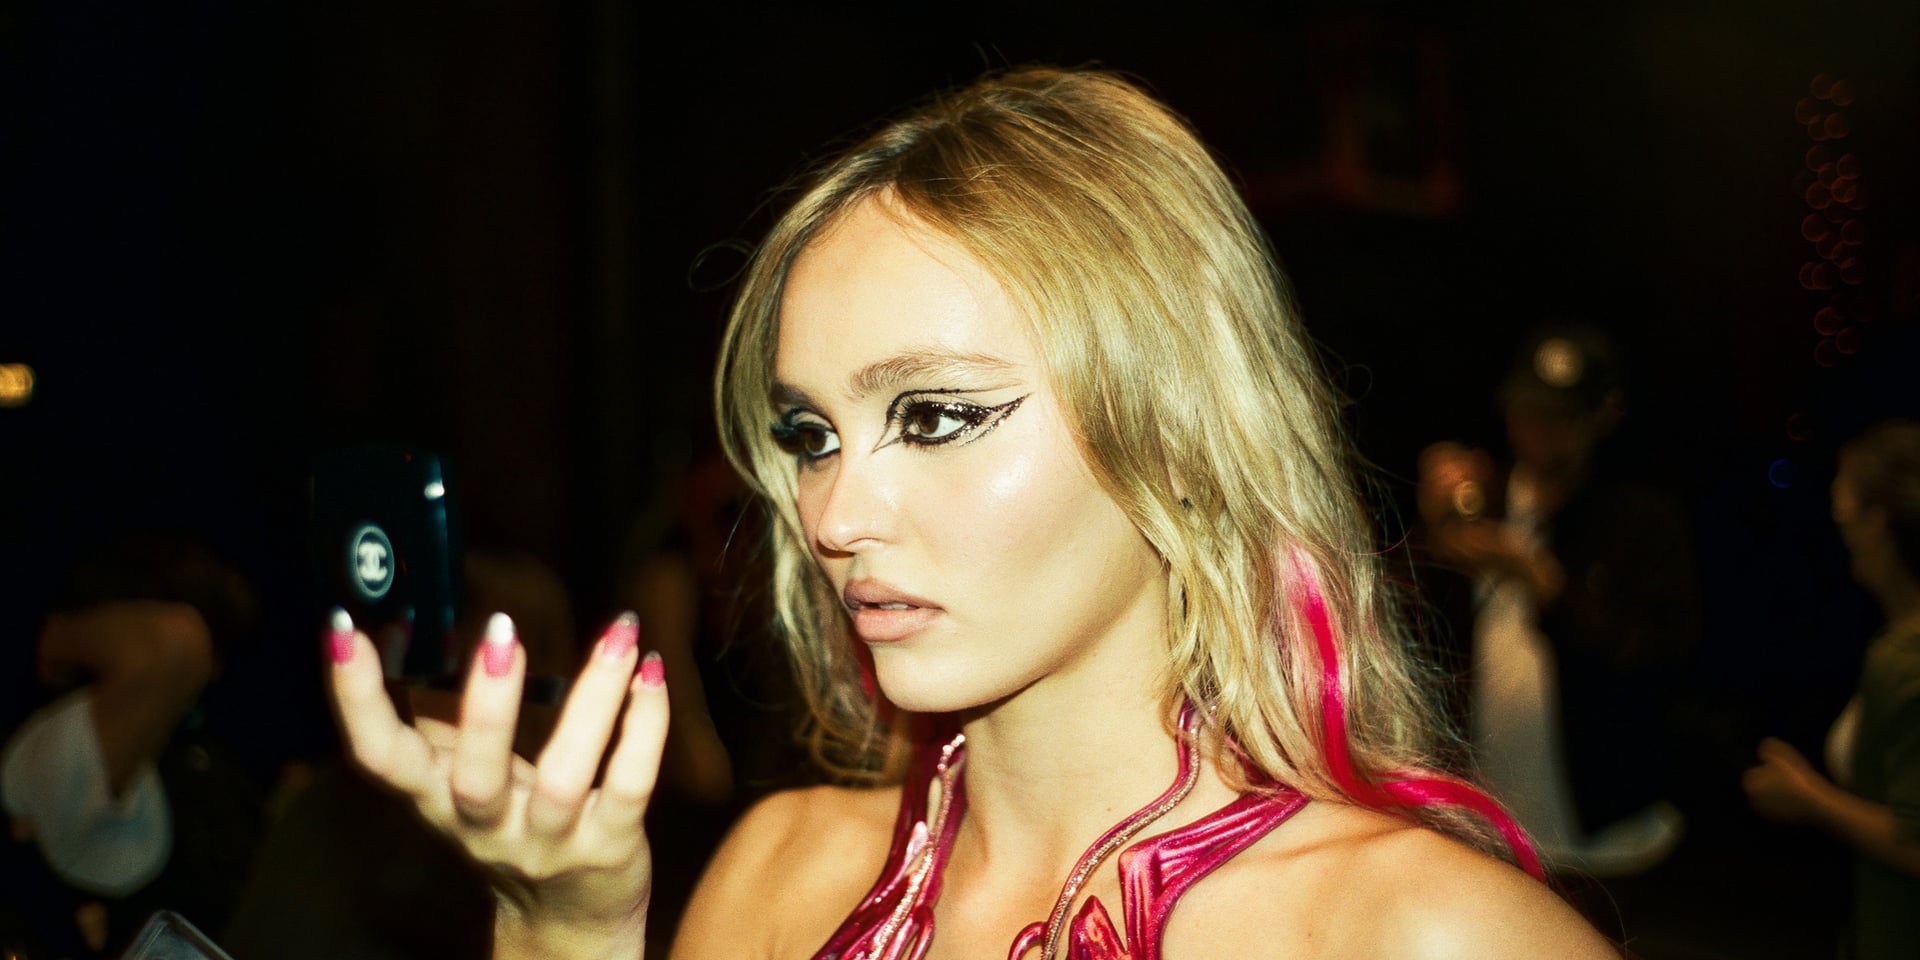 Cara and Lily-Rose Depp become Chanel space girls in new ad